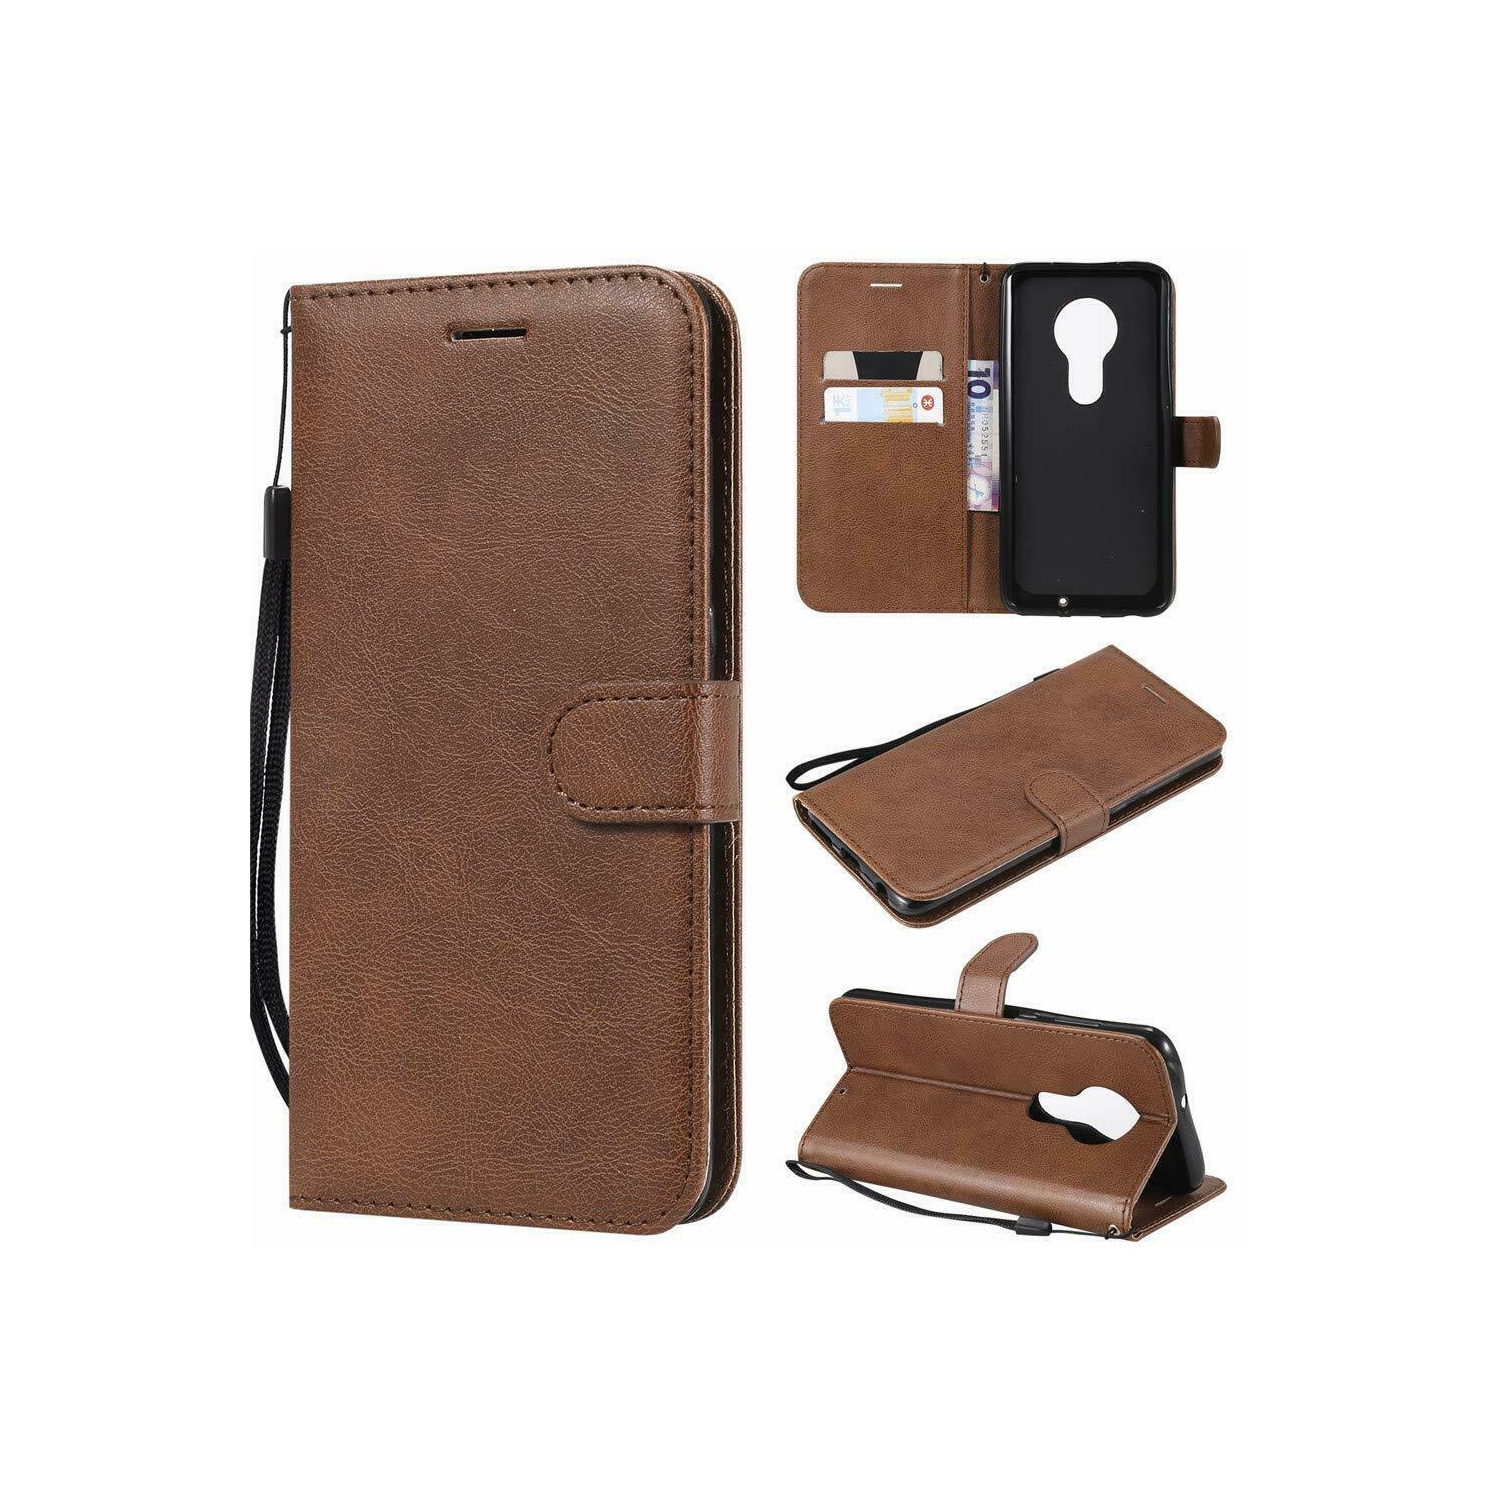 [CS] Motorola Moto G7 Play Case, Magnetic Leather Folio Wallet Flip Case Cover with Card Slot, Brown